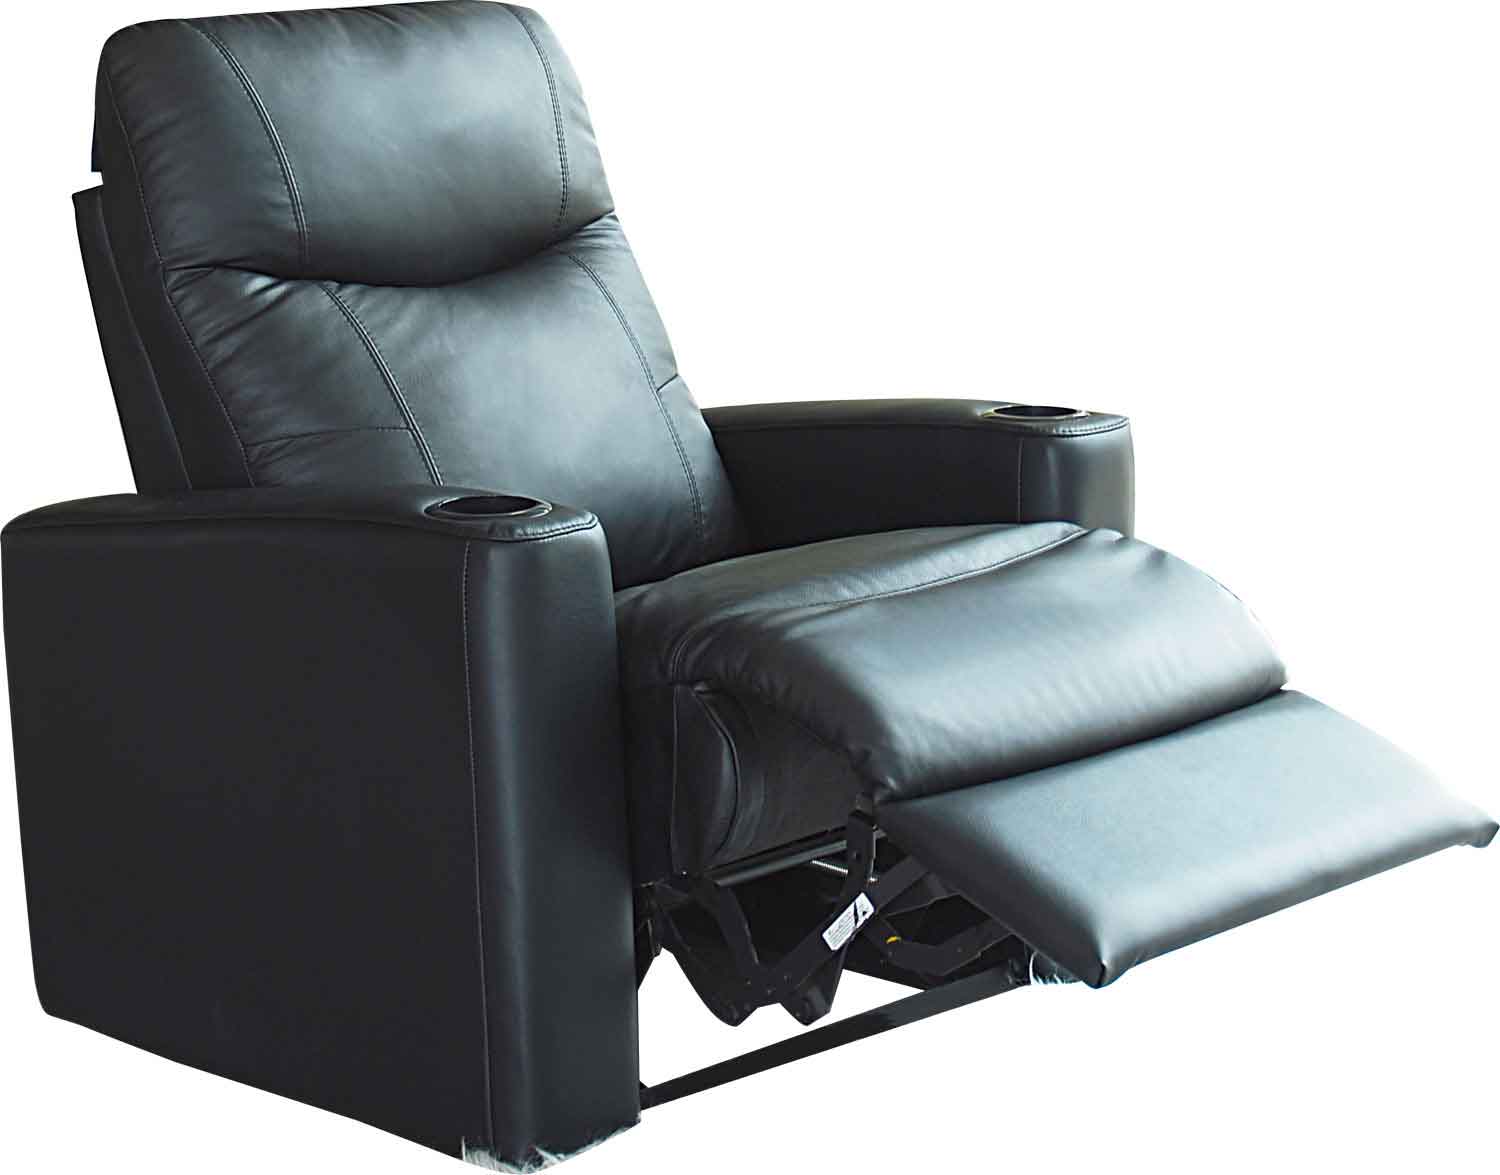 Coaster Director's Leather Theater Recliner